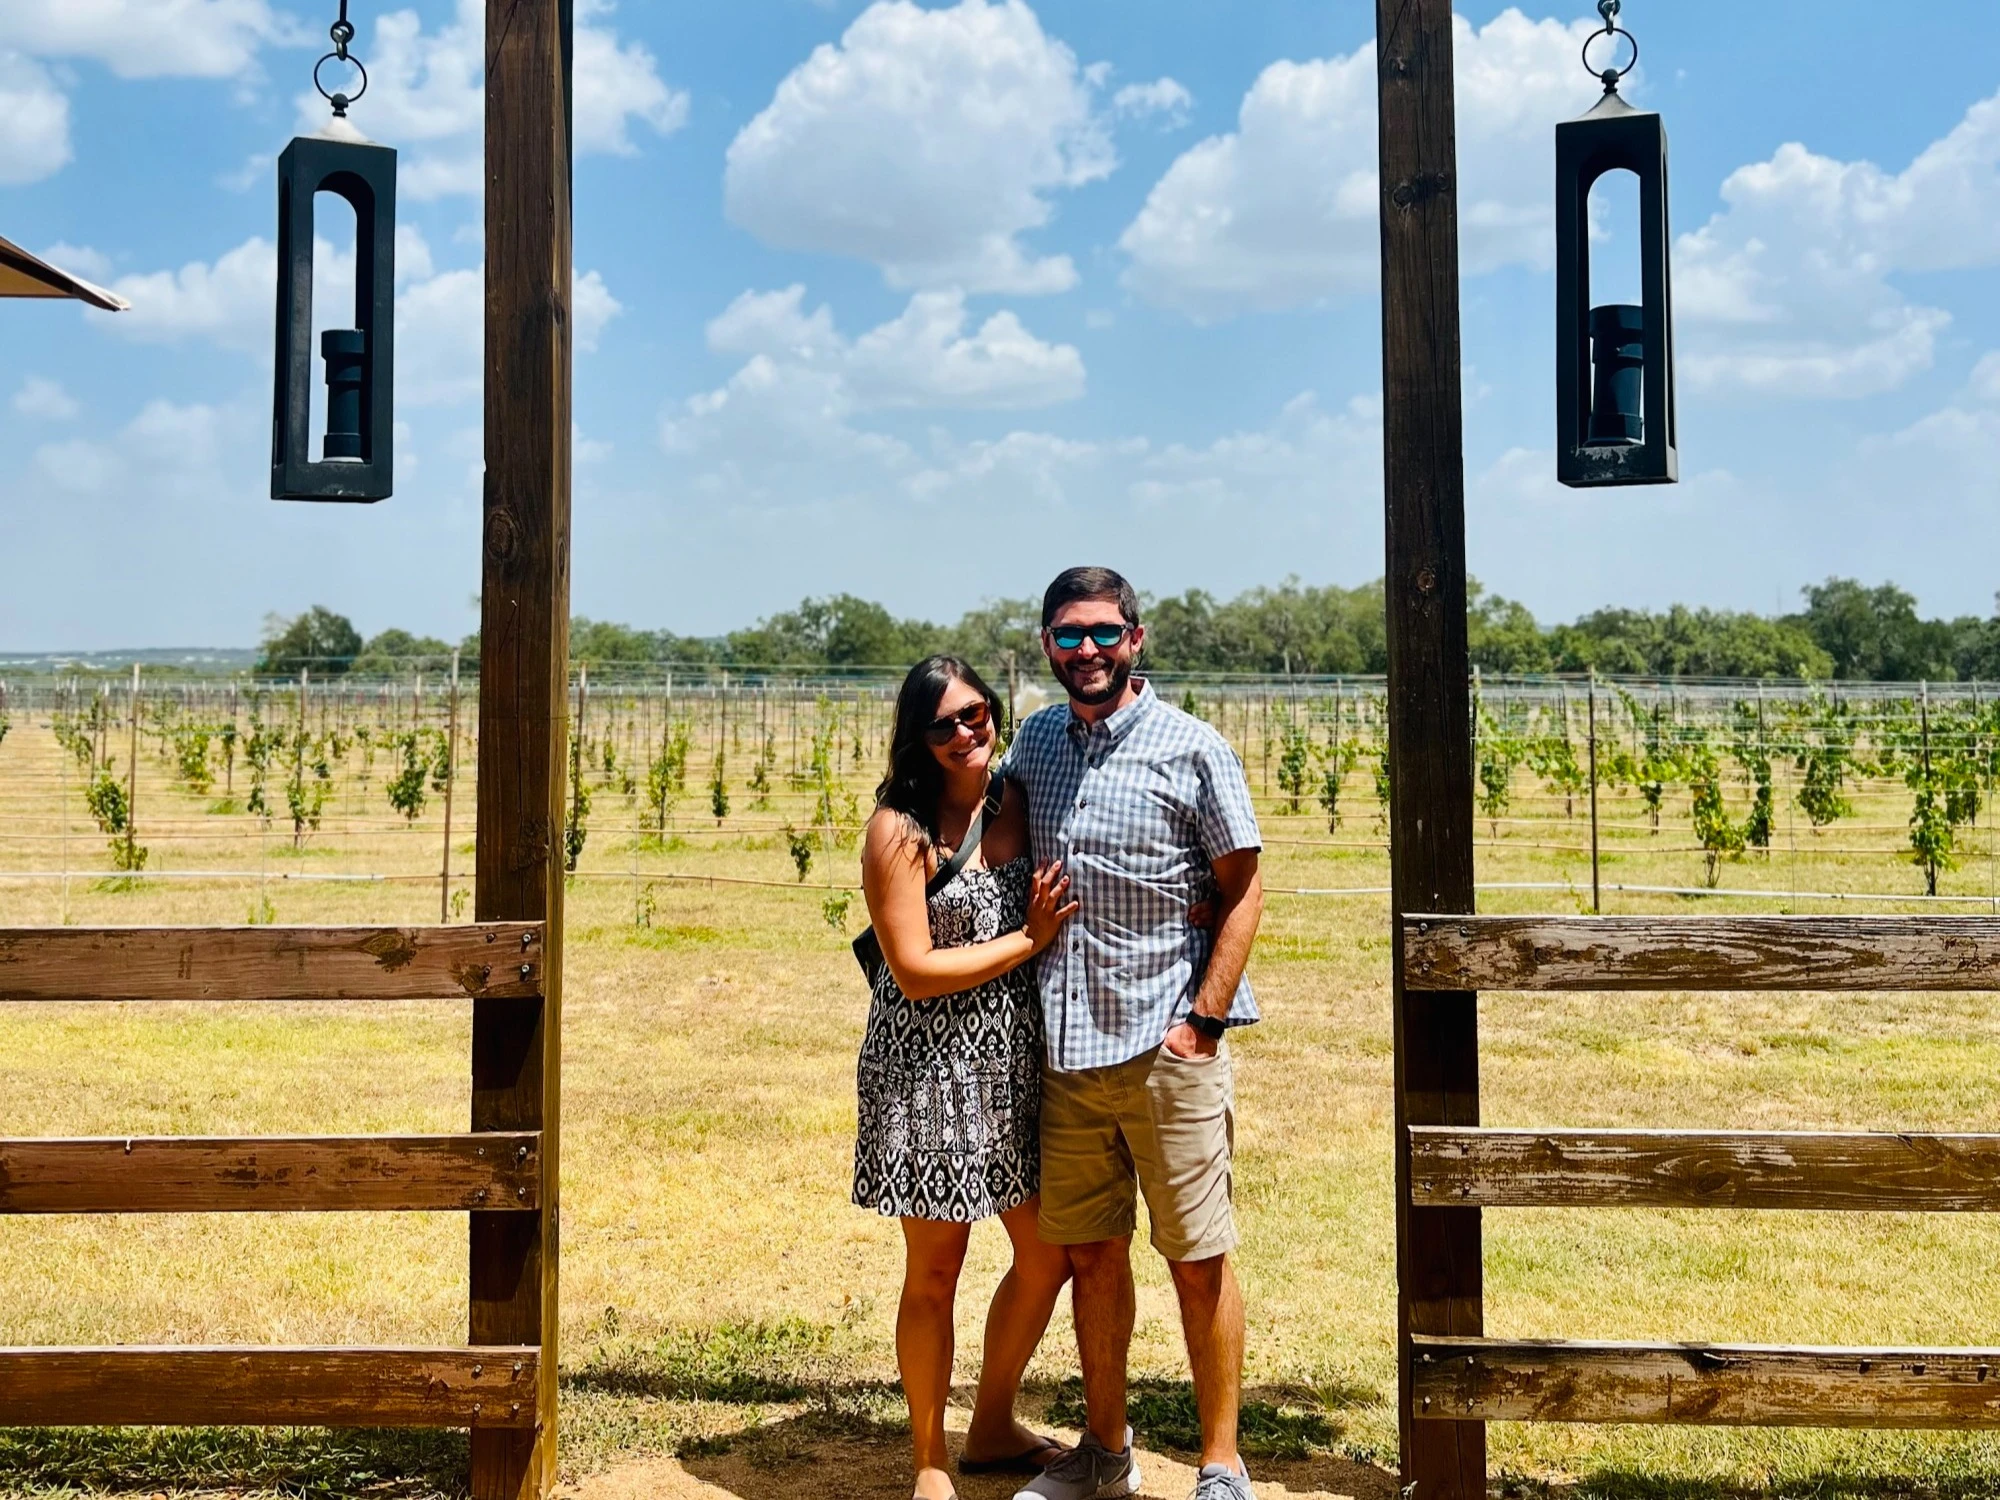 A man and woman standing in front of a vineyard.